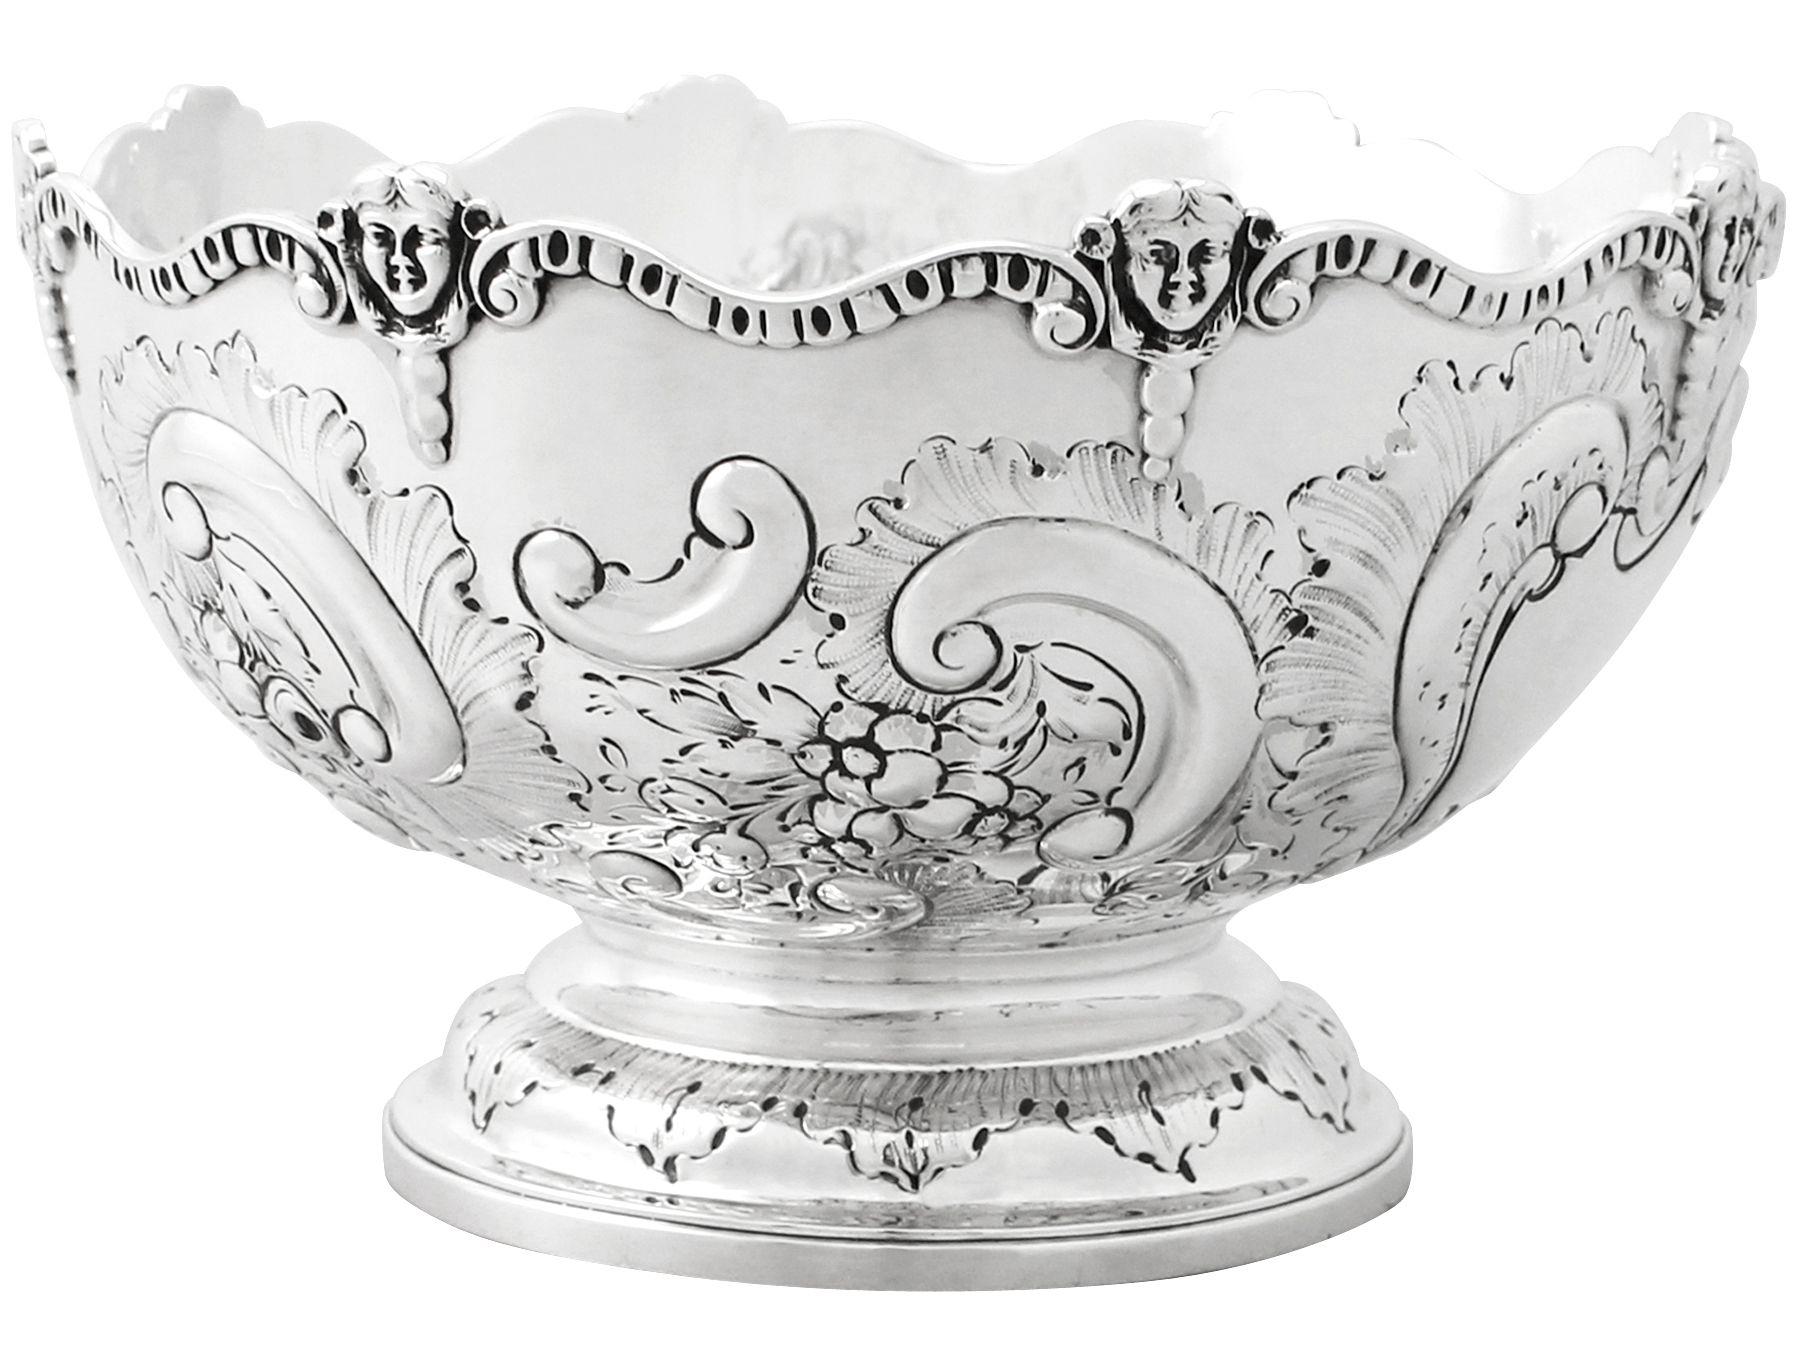 A fine and impressive antique Victorian English sterling silver presentation bowl made by Charles Stuart Harris; an addition to our dining silverware collection.

This impressive antique Victorian English sterling silver presentation bowl has a